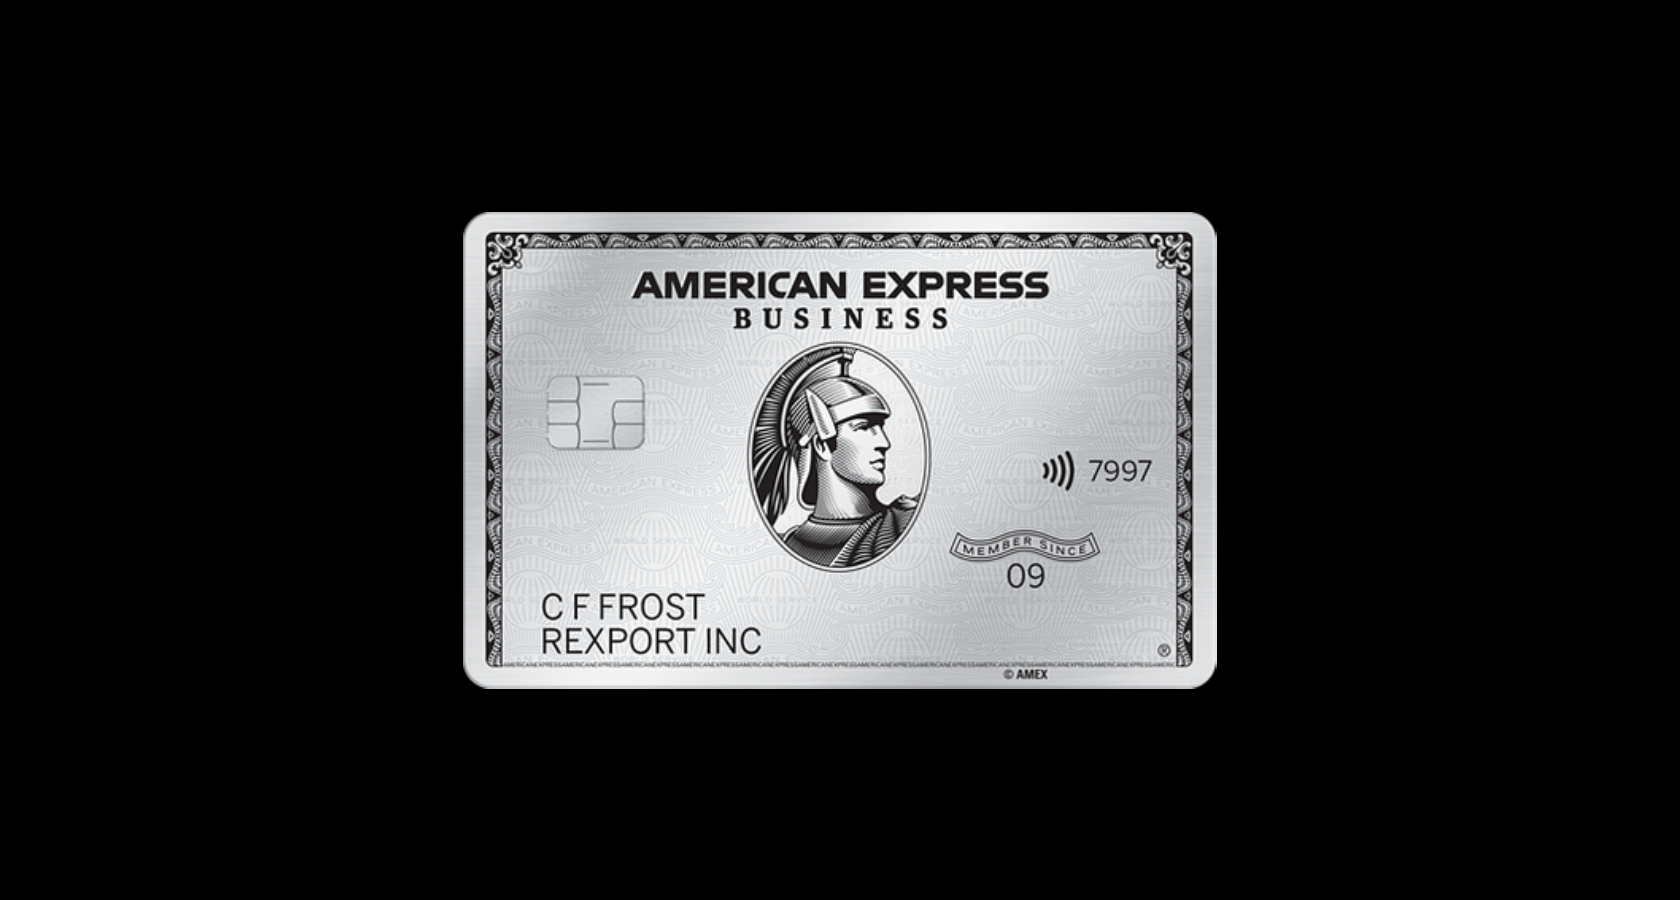 Business Prime American Express Card